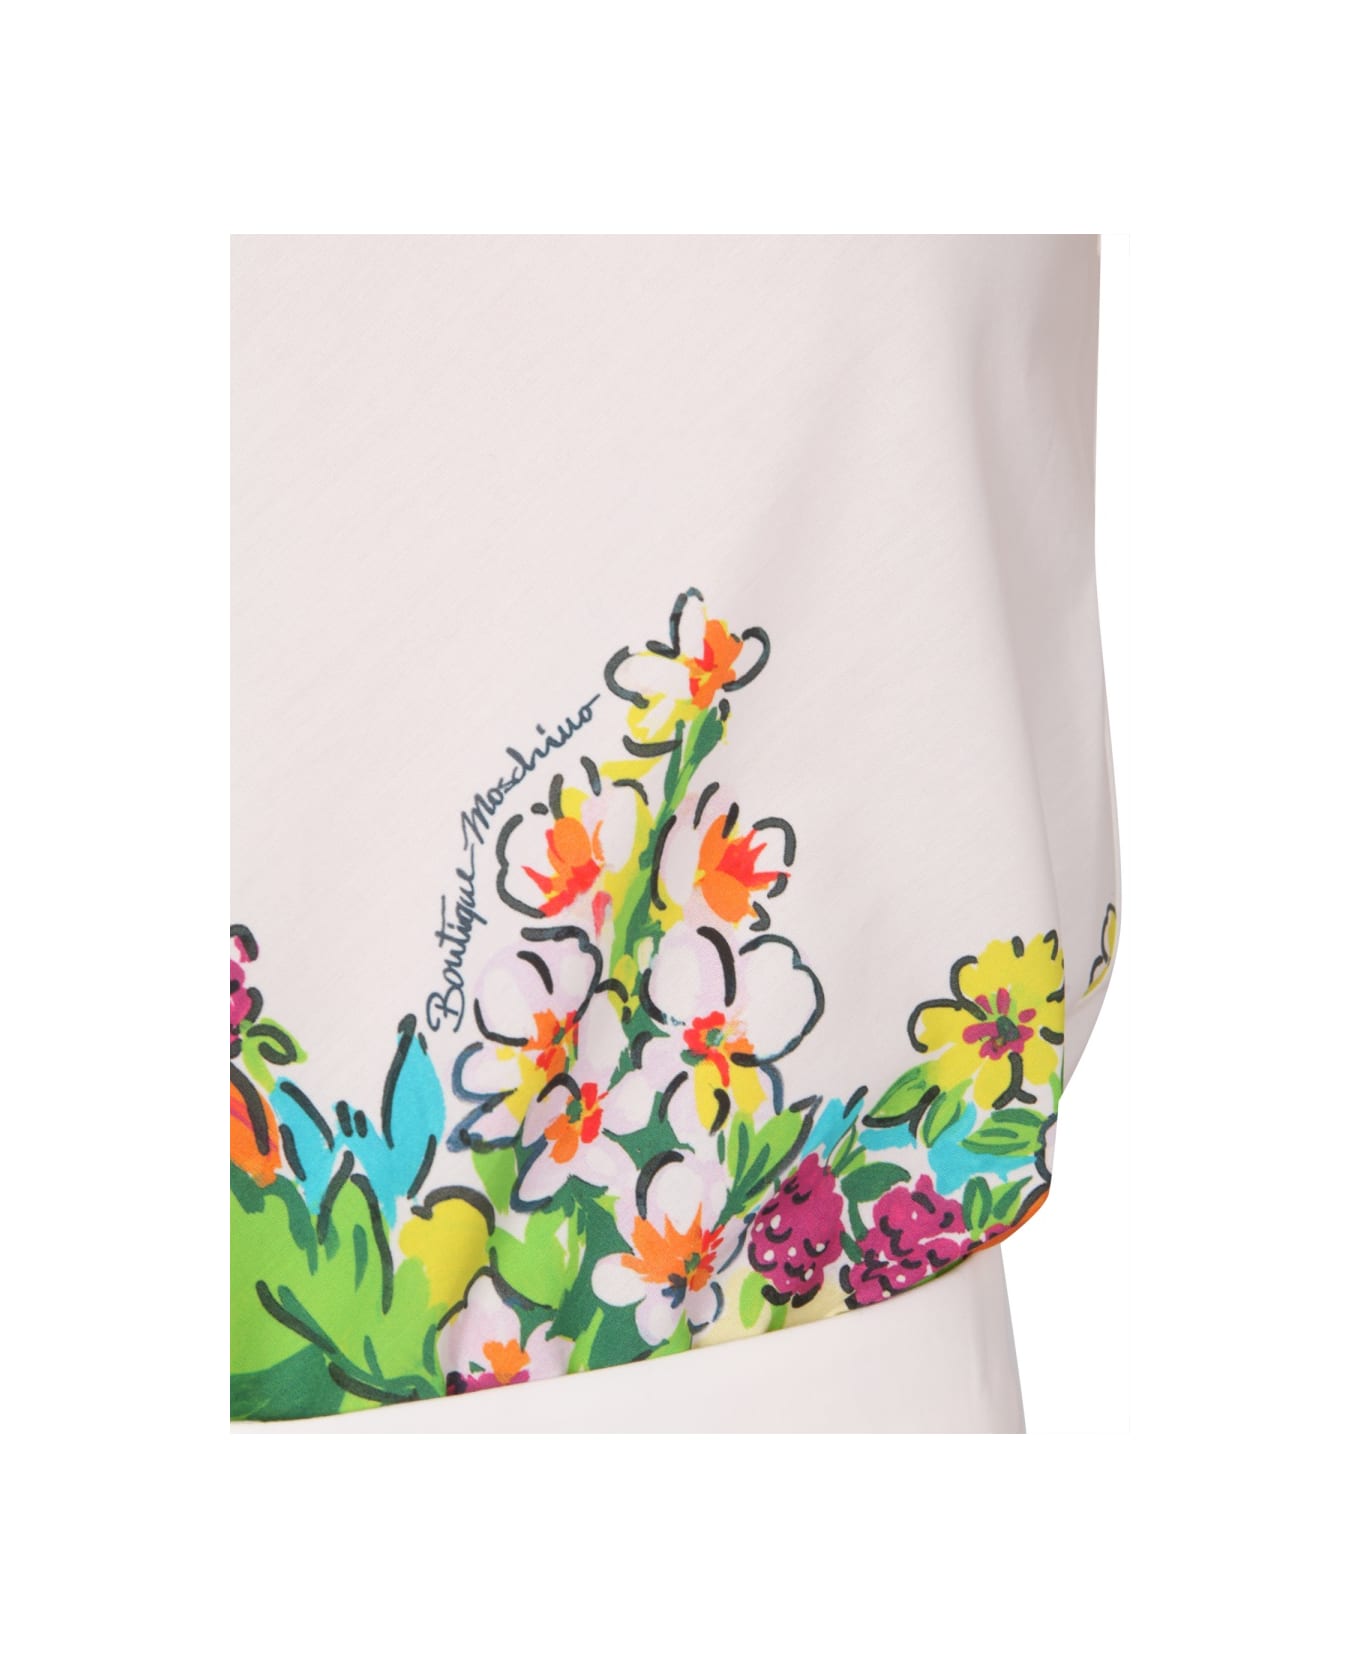 Boutique Moschino Flower And Fruit Print Top - MULTICOLOUR キャミソール